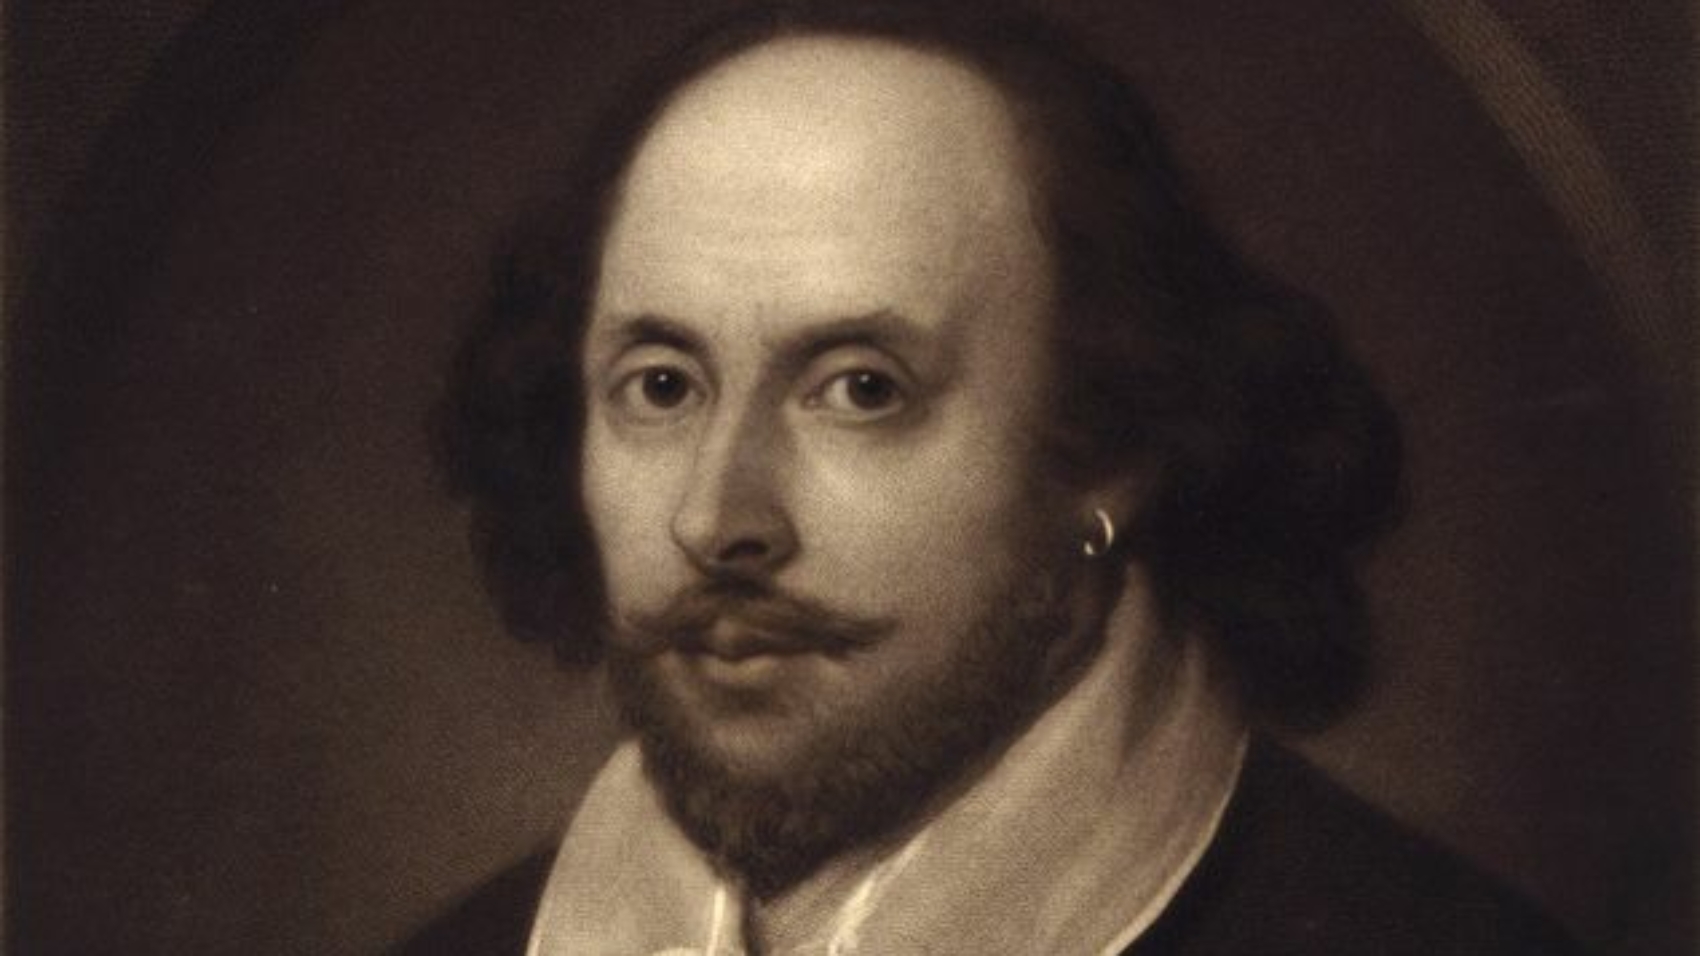 article_This_1849_vintage_print_features_the_portrait_of_William_Shakespeare.